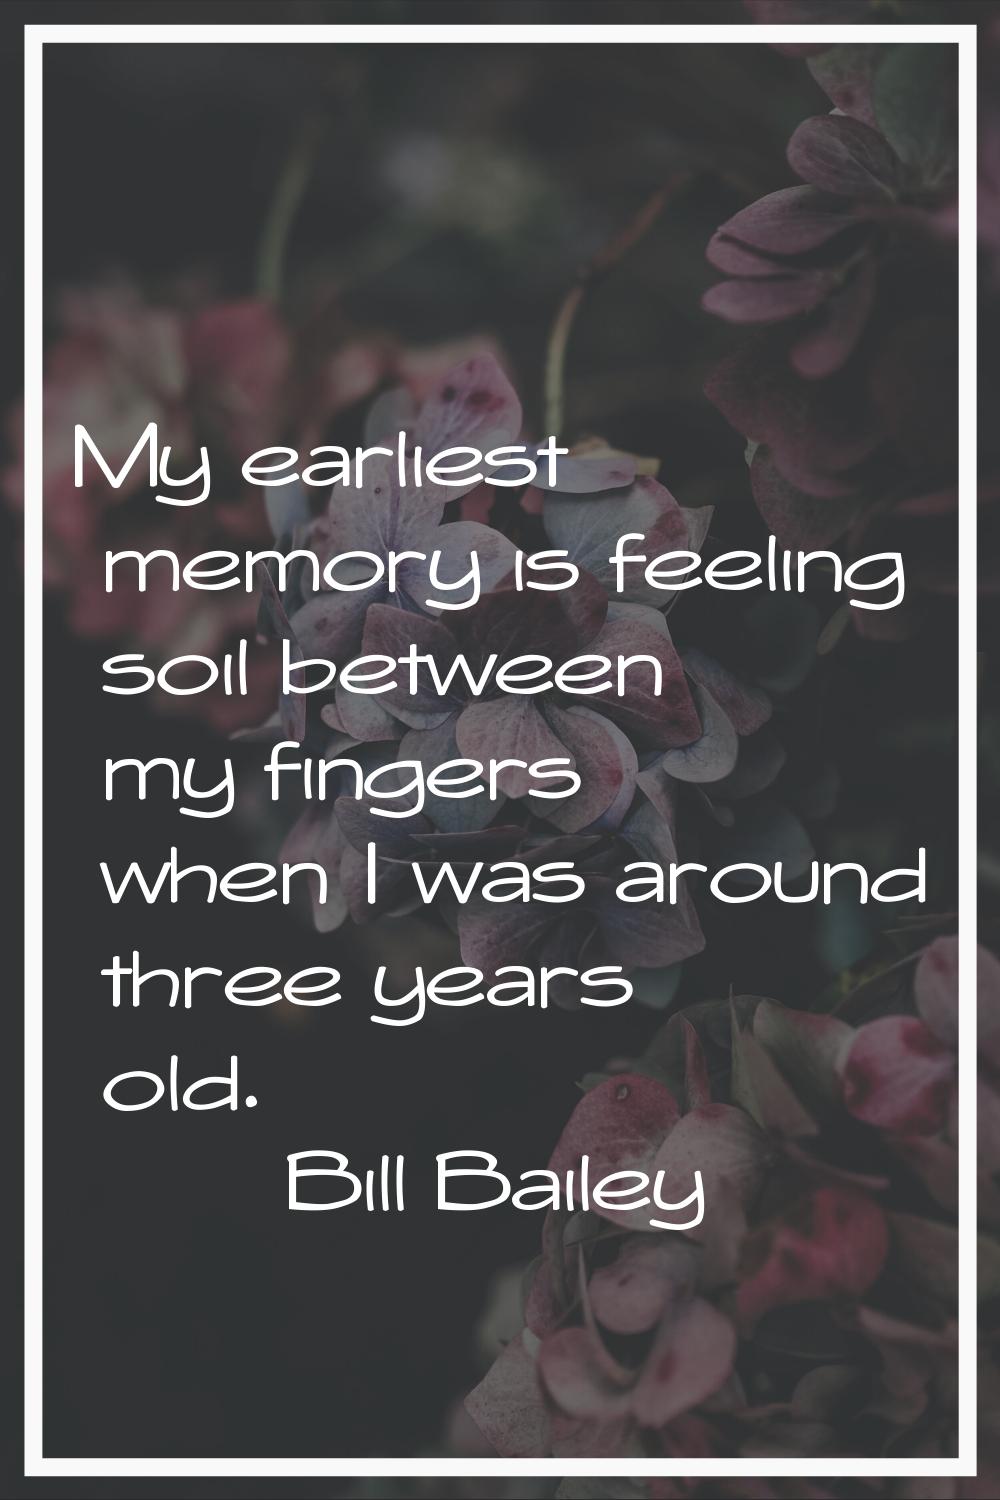 My earliest memory is feeling soil between my fingers when I was around three years old.